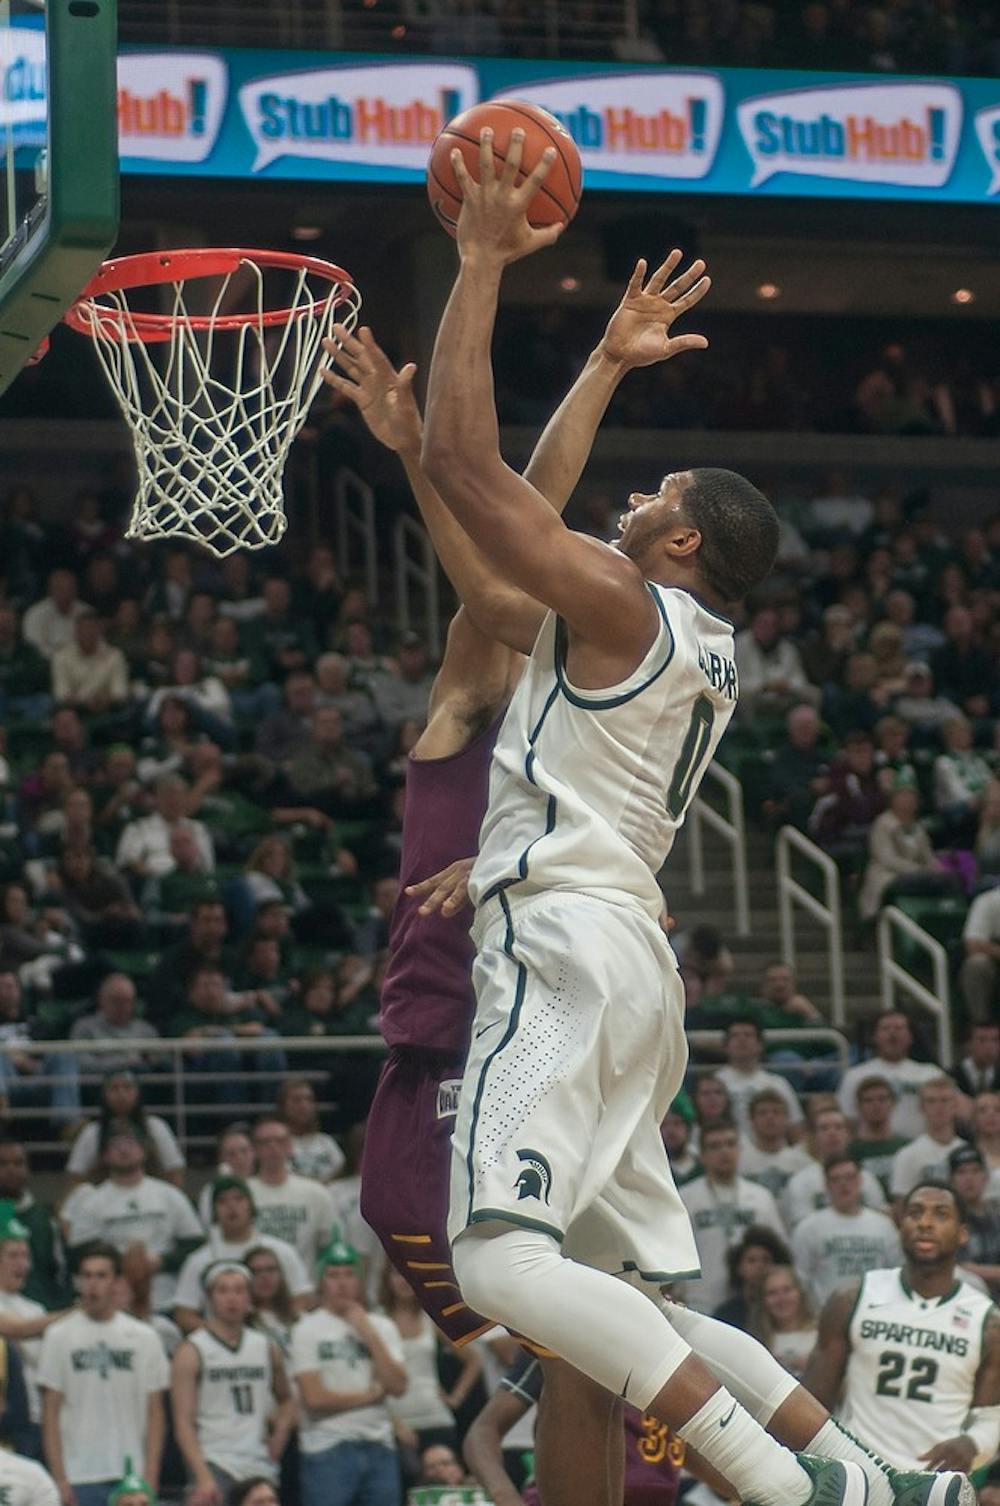 <p>Freshman forward Marvin Clark Jr. goes for the layup  Nov. 21, 2014, during the game against Loyal University at Breslin Center. The Spartans defeated the Ramblers, 87-52. Clark Jr. scored a total of 15 points. Raymond Williams/The State News</p>